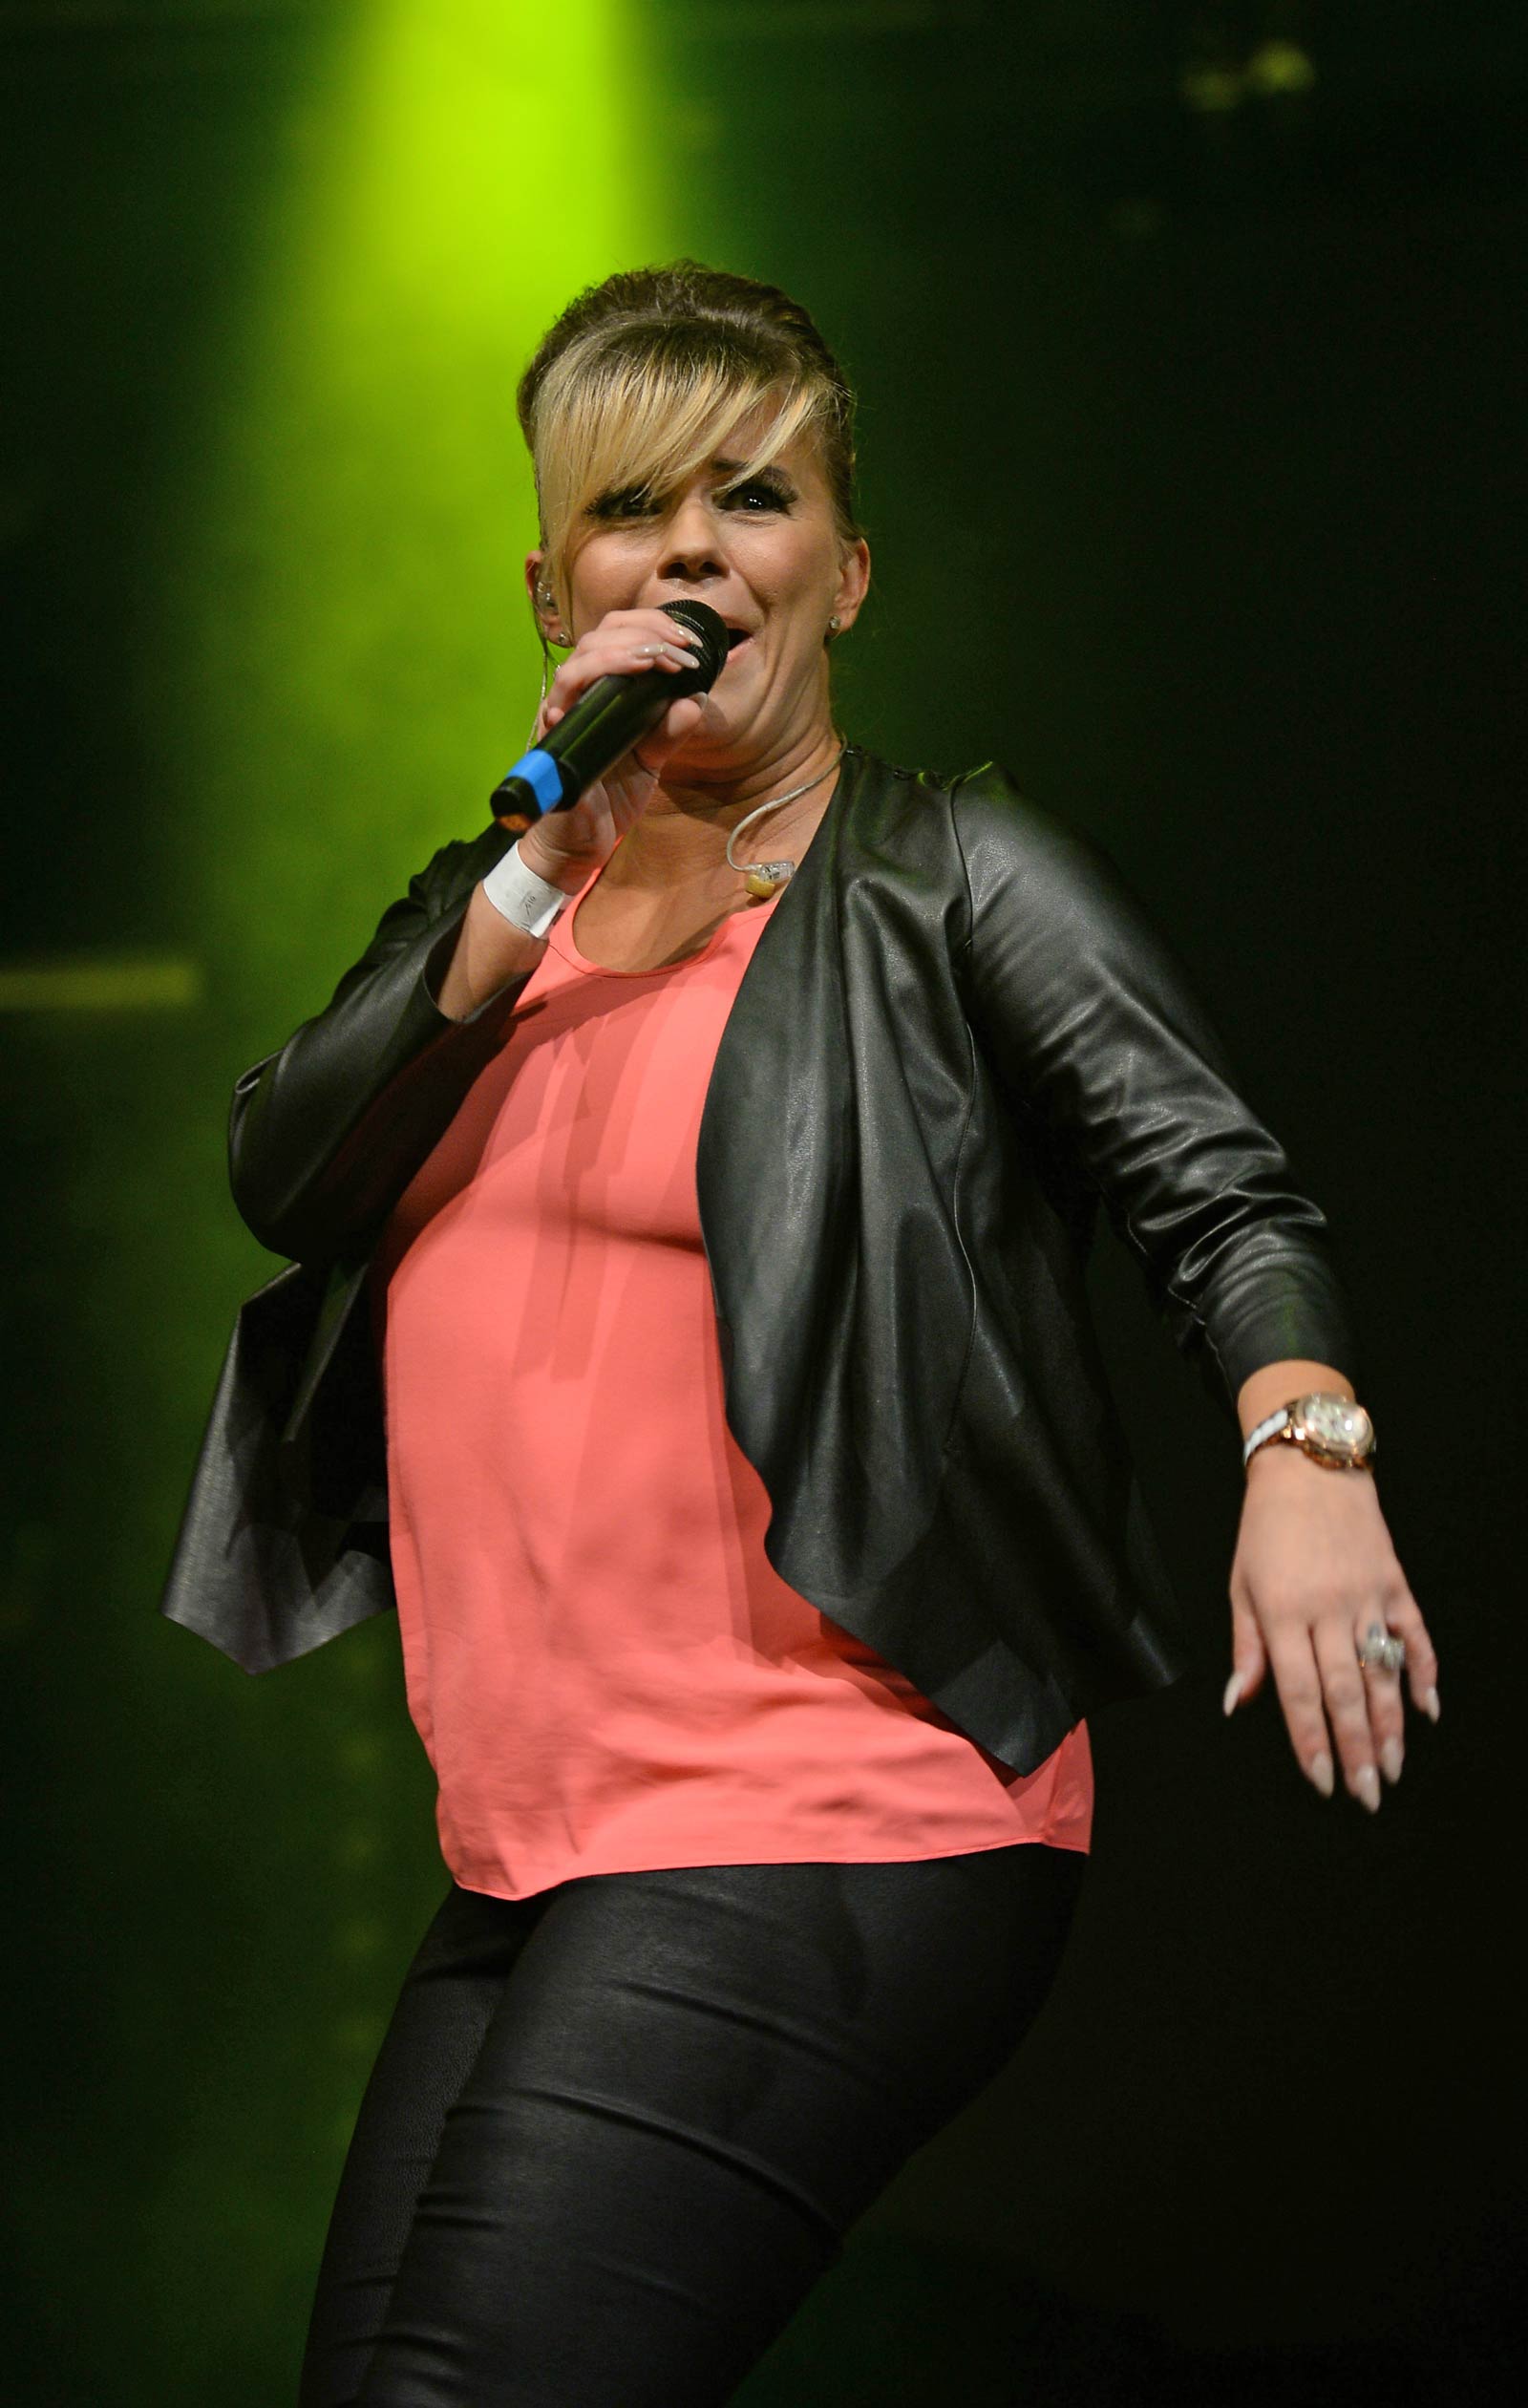 Kerry Katona perform at The Big Weekend Manchester Pride